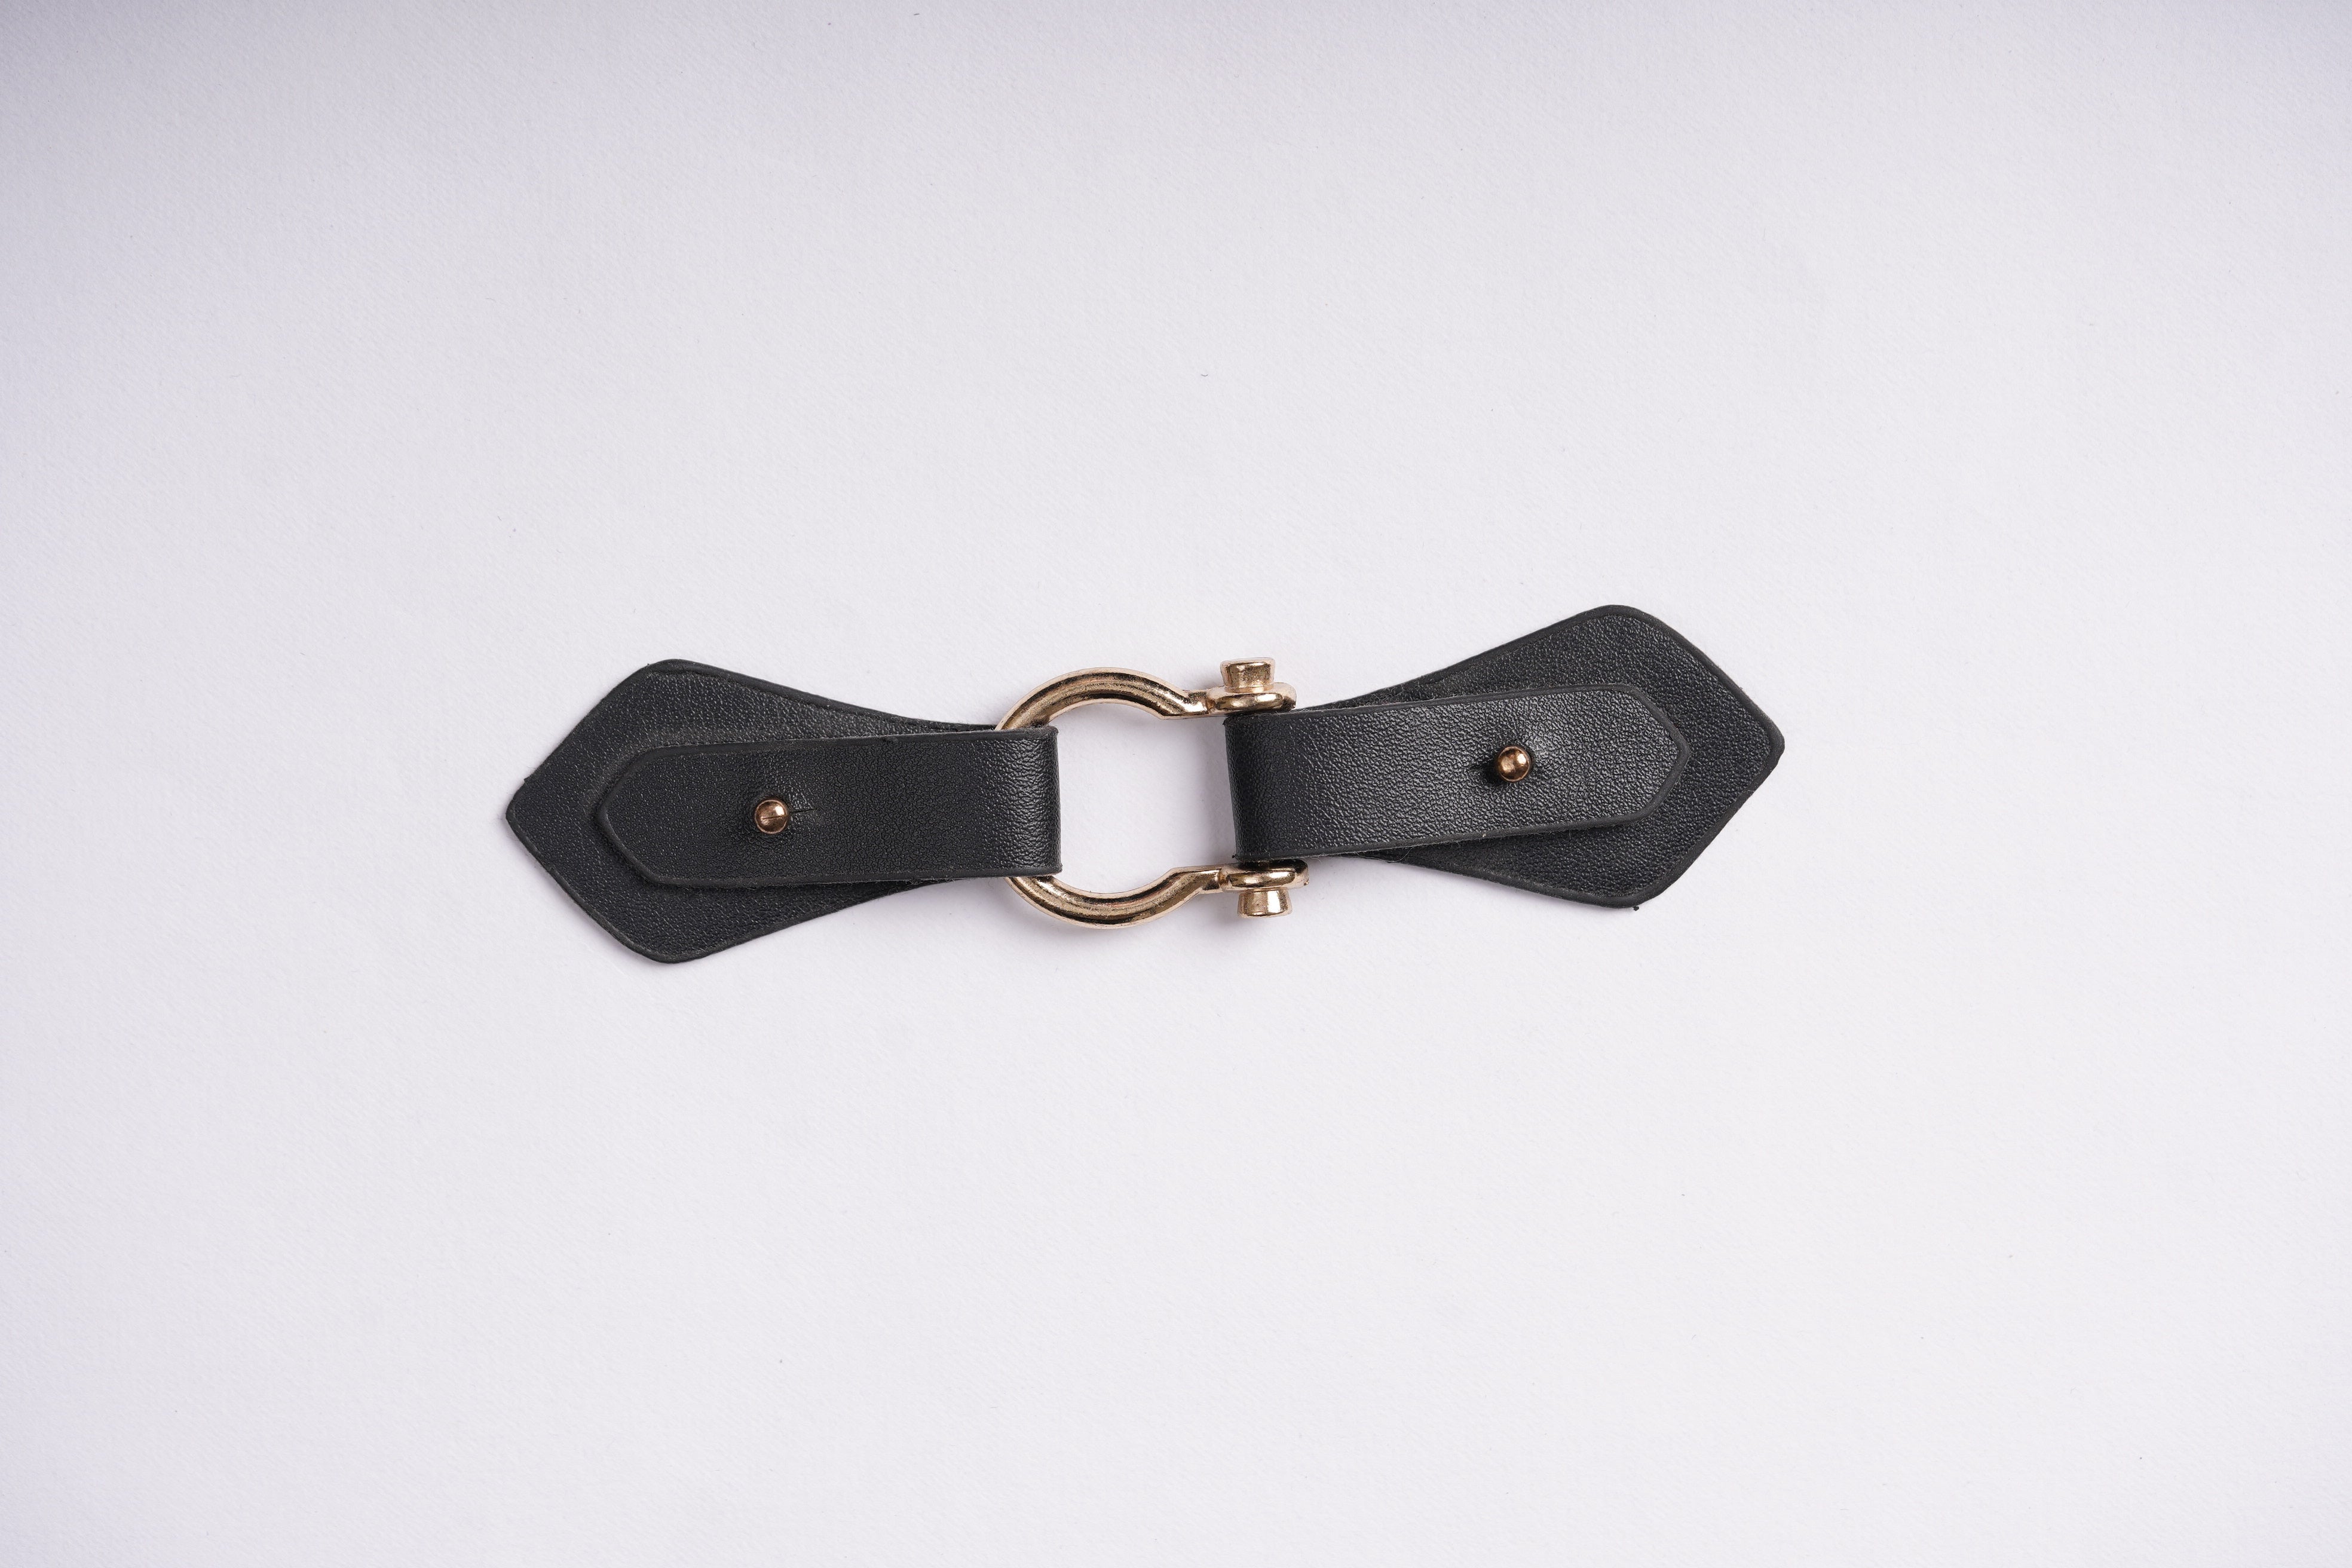 CLASSIC SEW-ON BLACK PU LEATHER GOLD CLIP CLASP BUCKLE